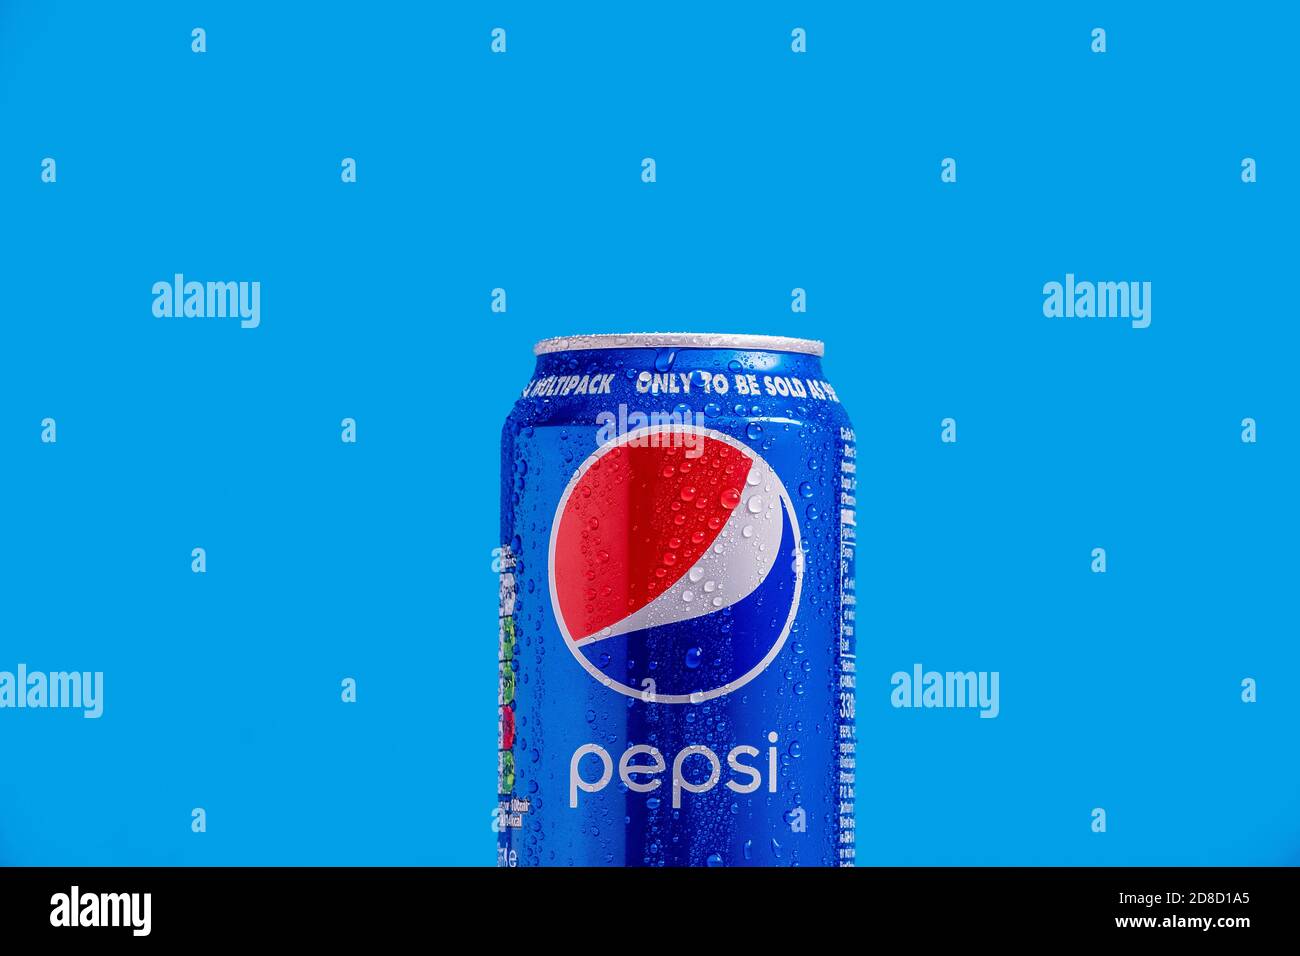 London, United Kingdom - October 29 2020:  Ice cold can of Pepsi alone with condensation on a blue background. Stock Photo